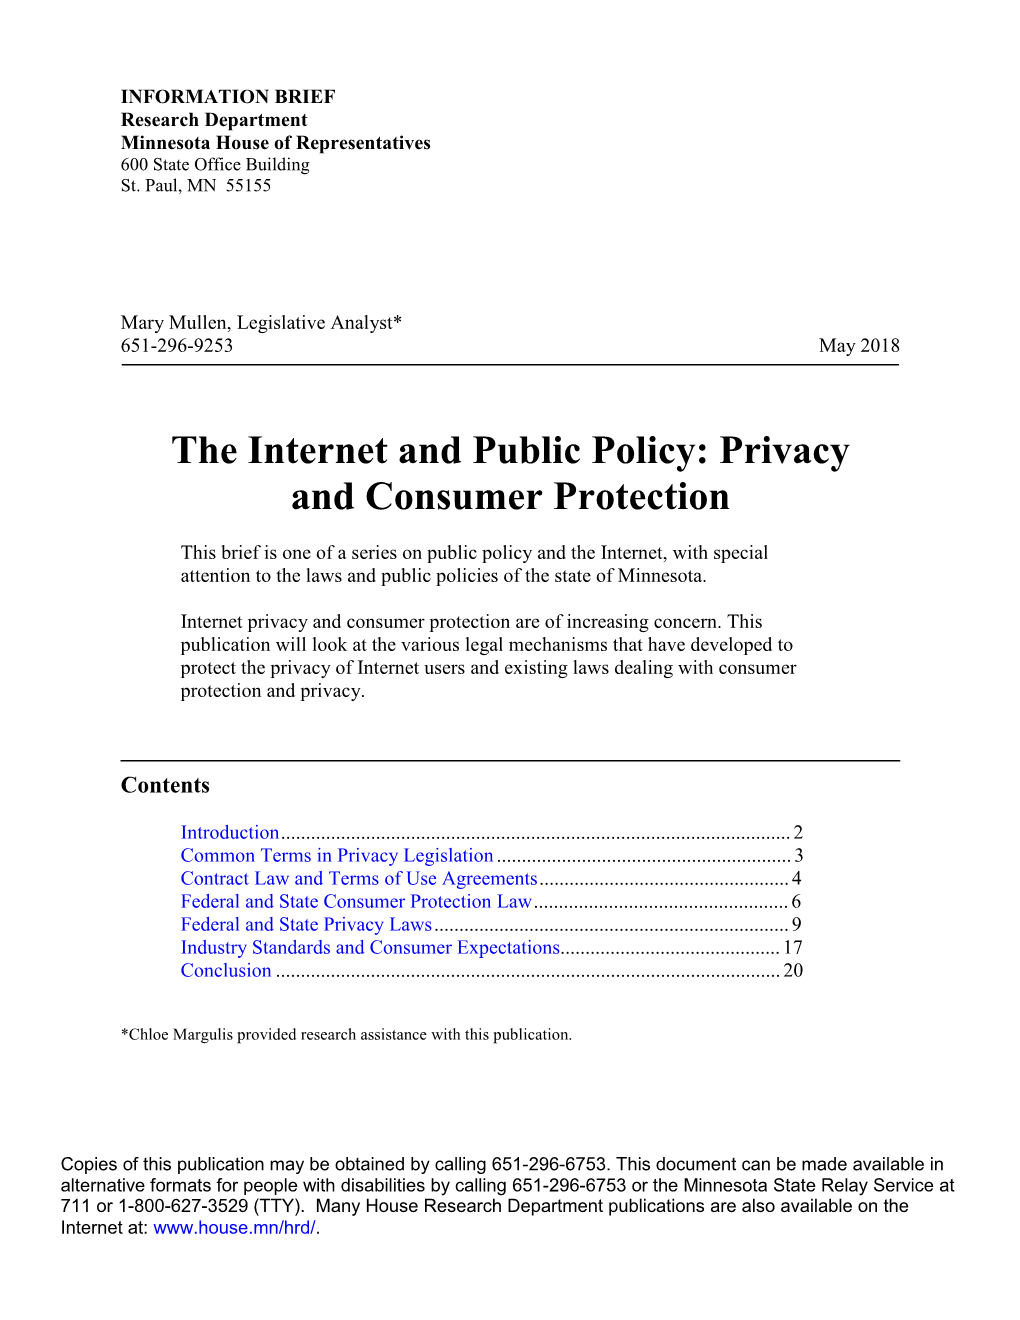 The Internet and Public Policy: Privacy and Consumer Protection